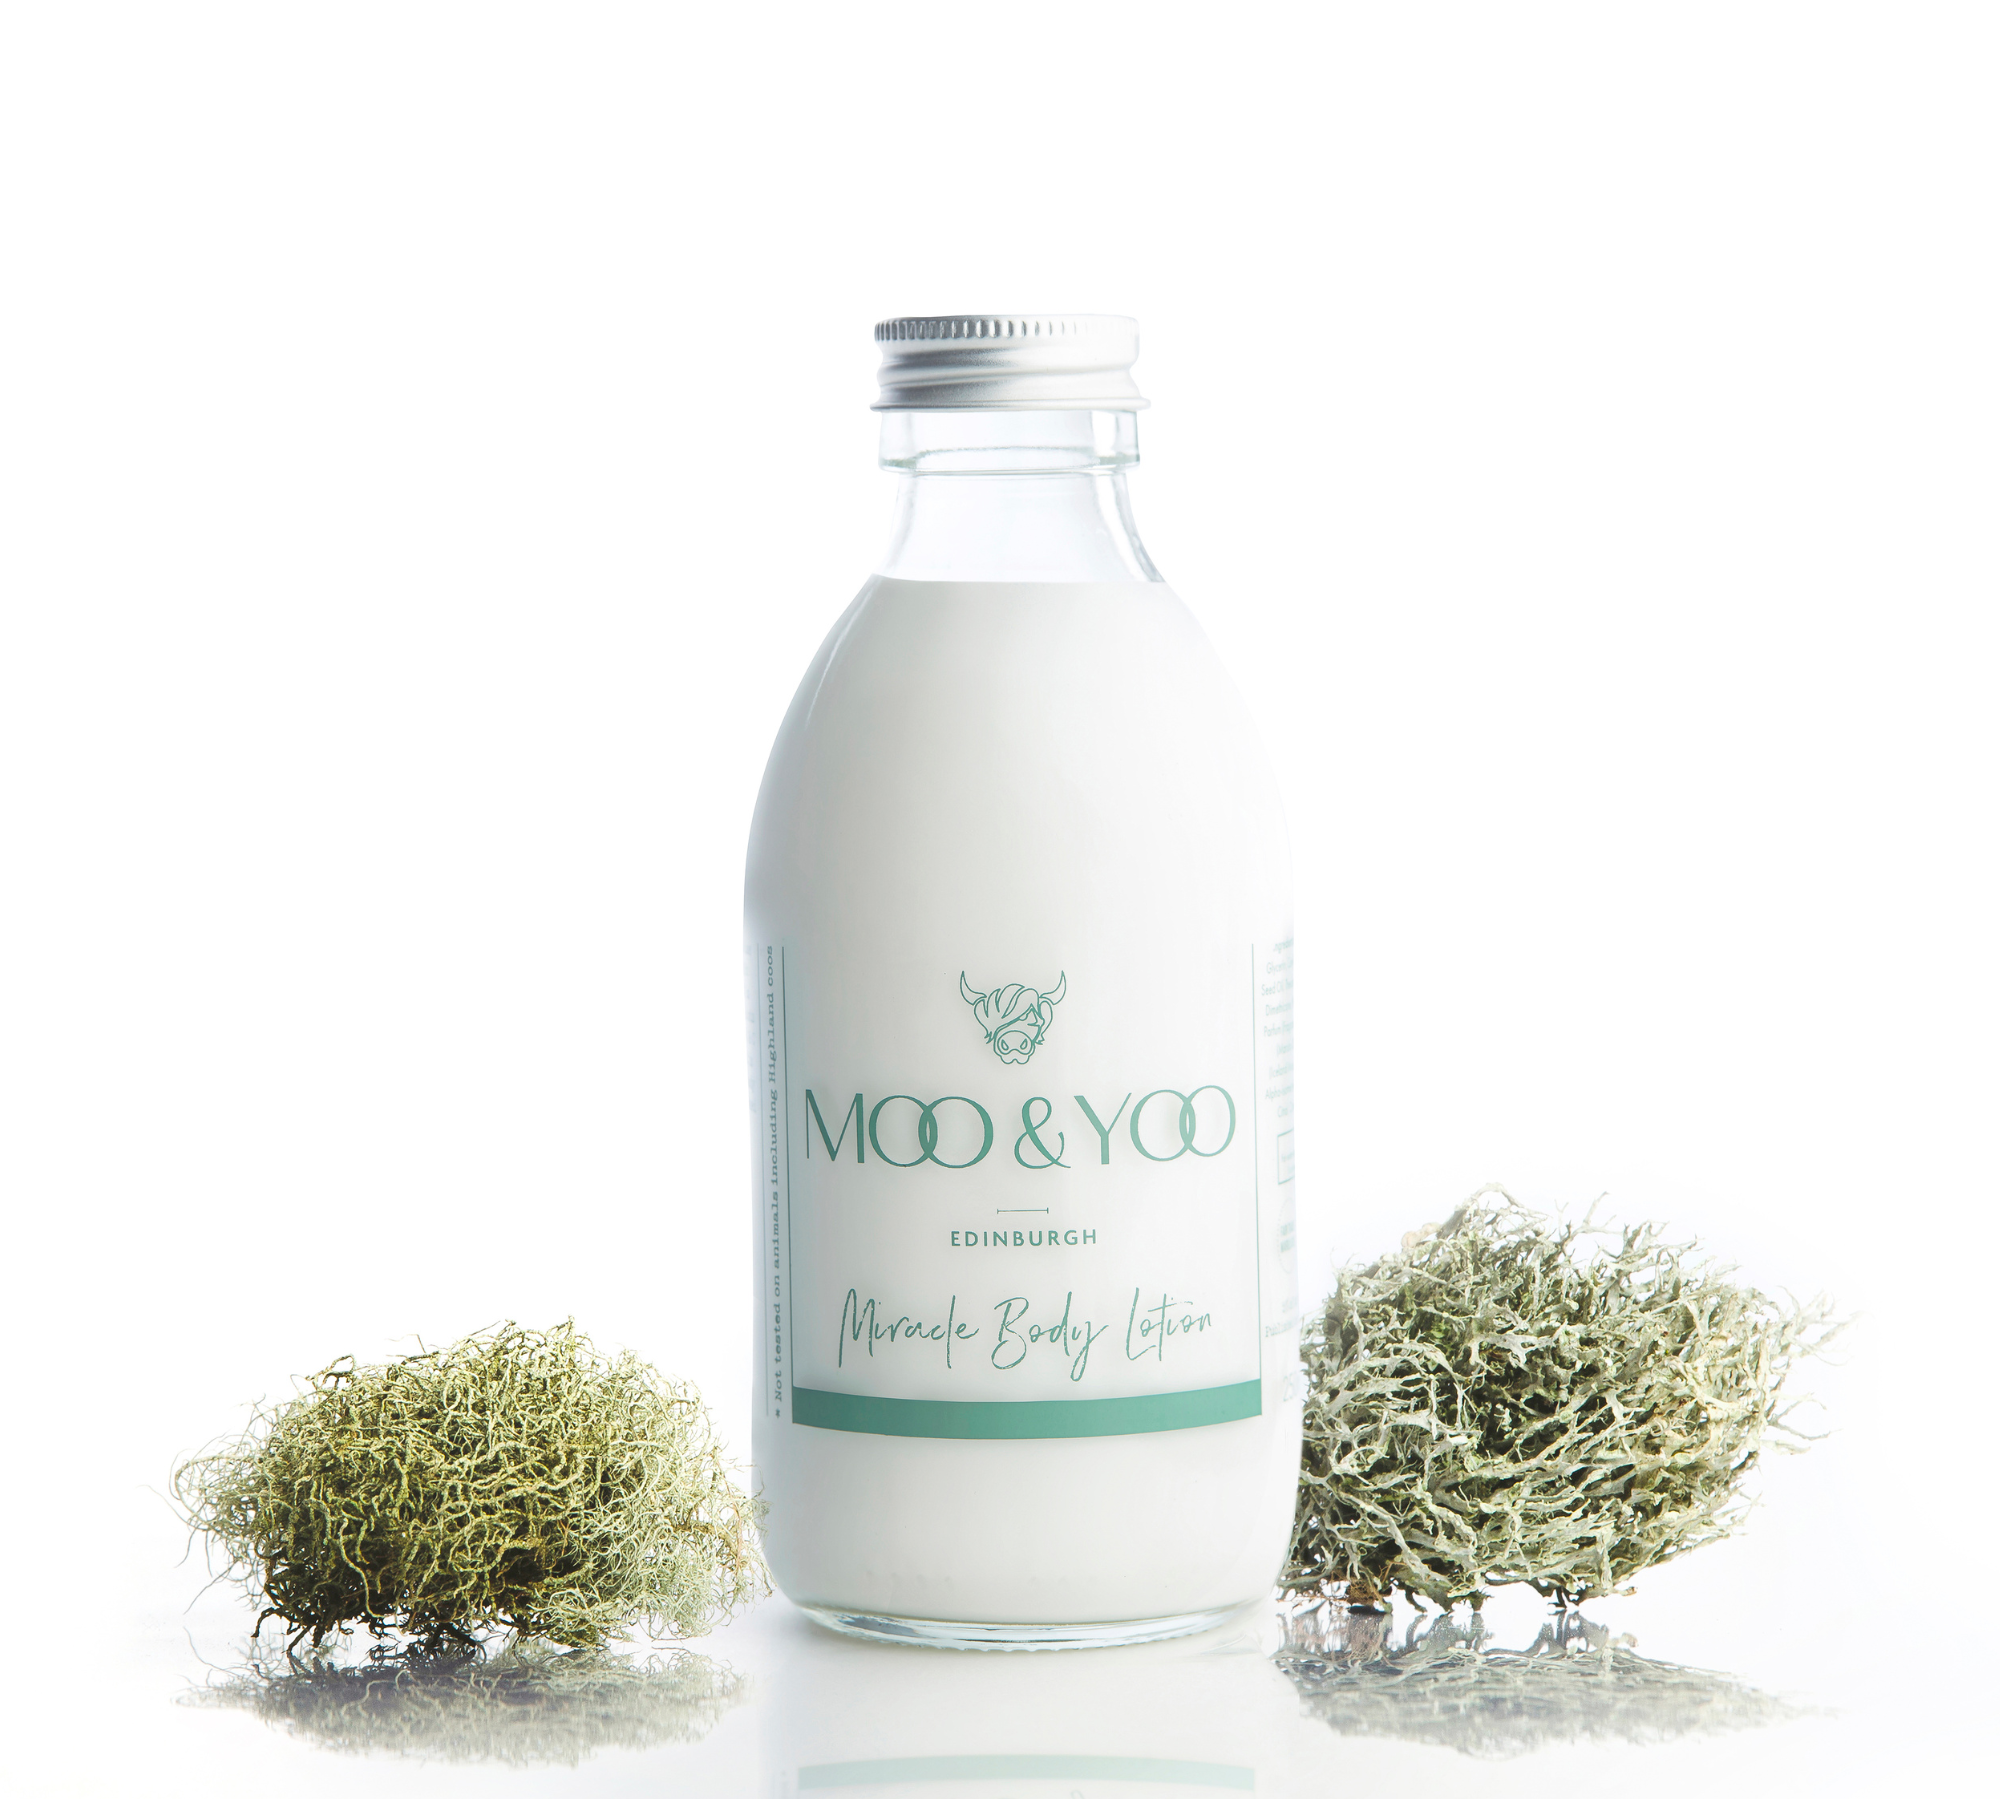 studio shot of our miracle body lotion with an aluminium lid in a glass bottle. There is green sprigs of moss on either side against a white background